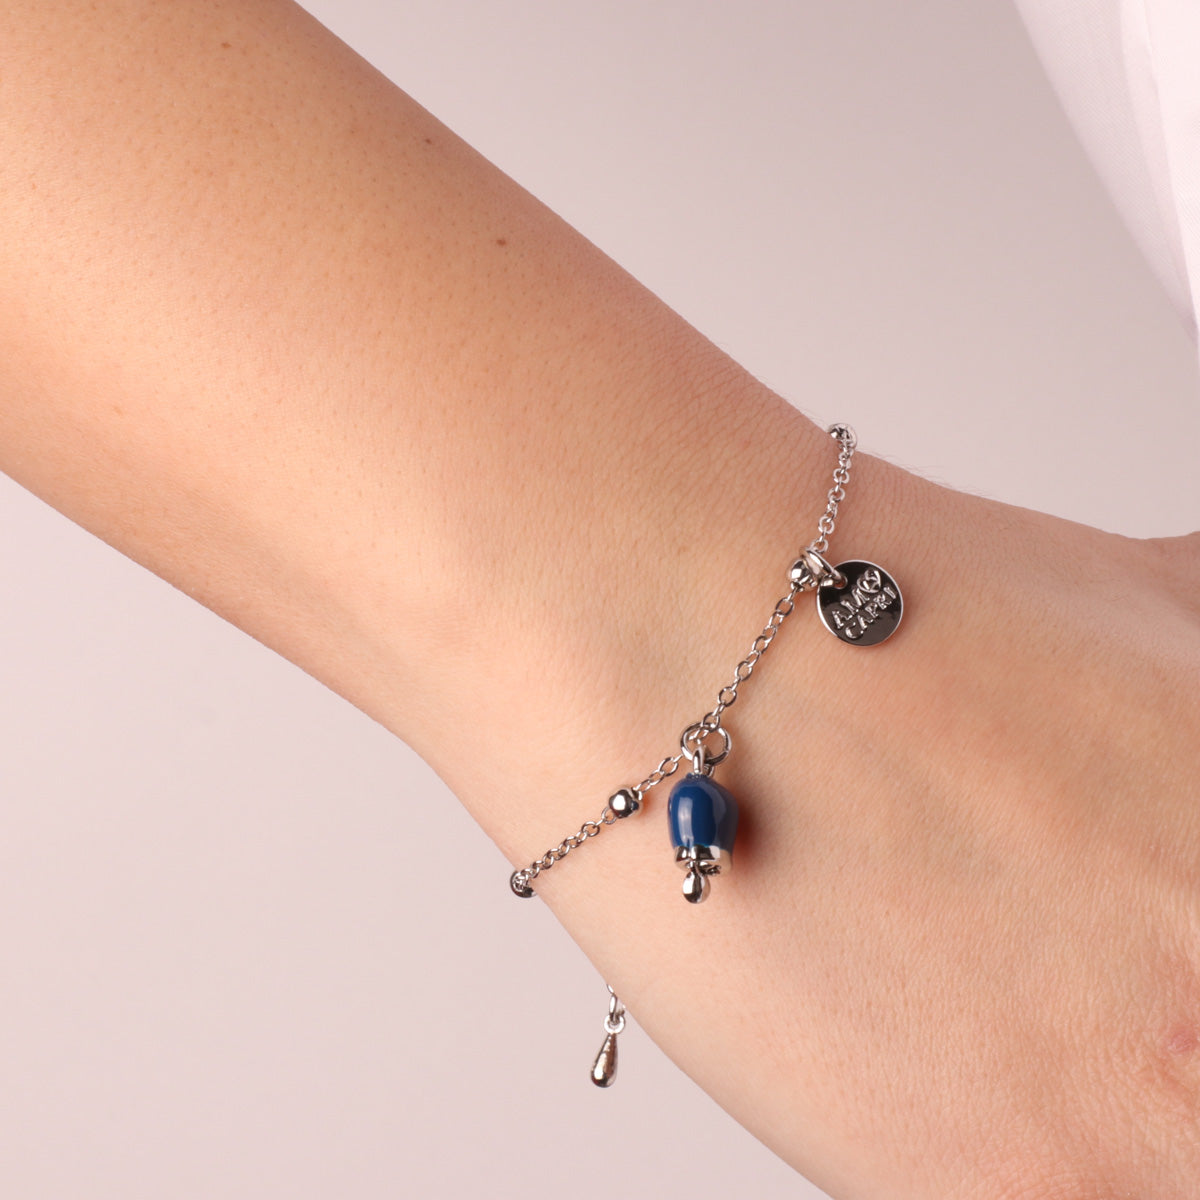 Metal bracelet with pendant charm bell, embellished with blue enamel and light point